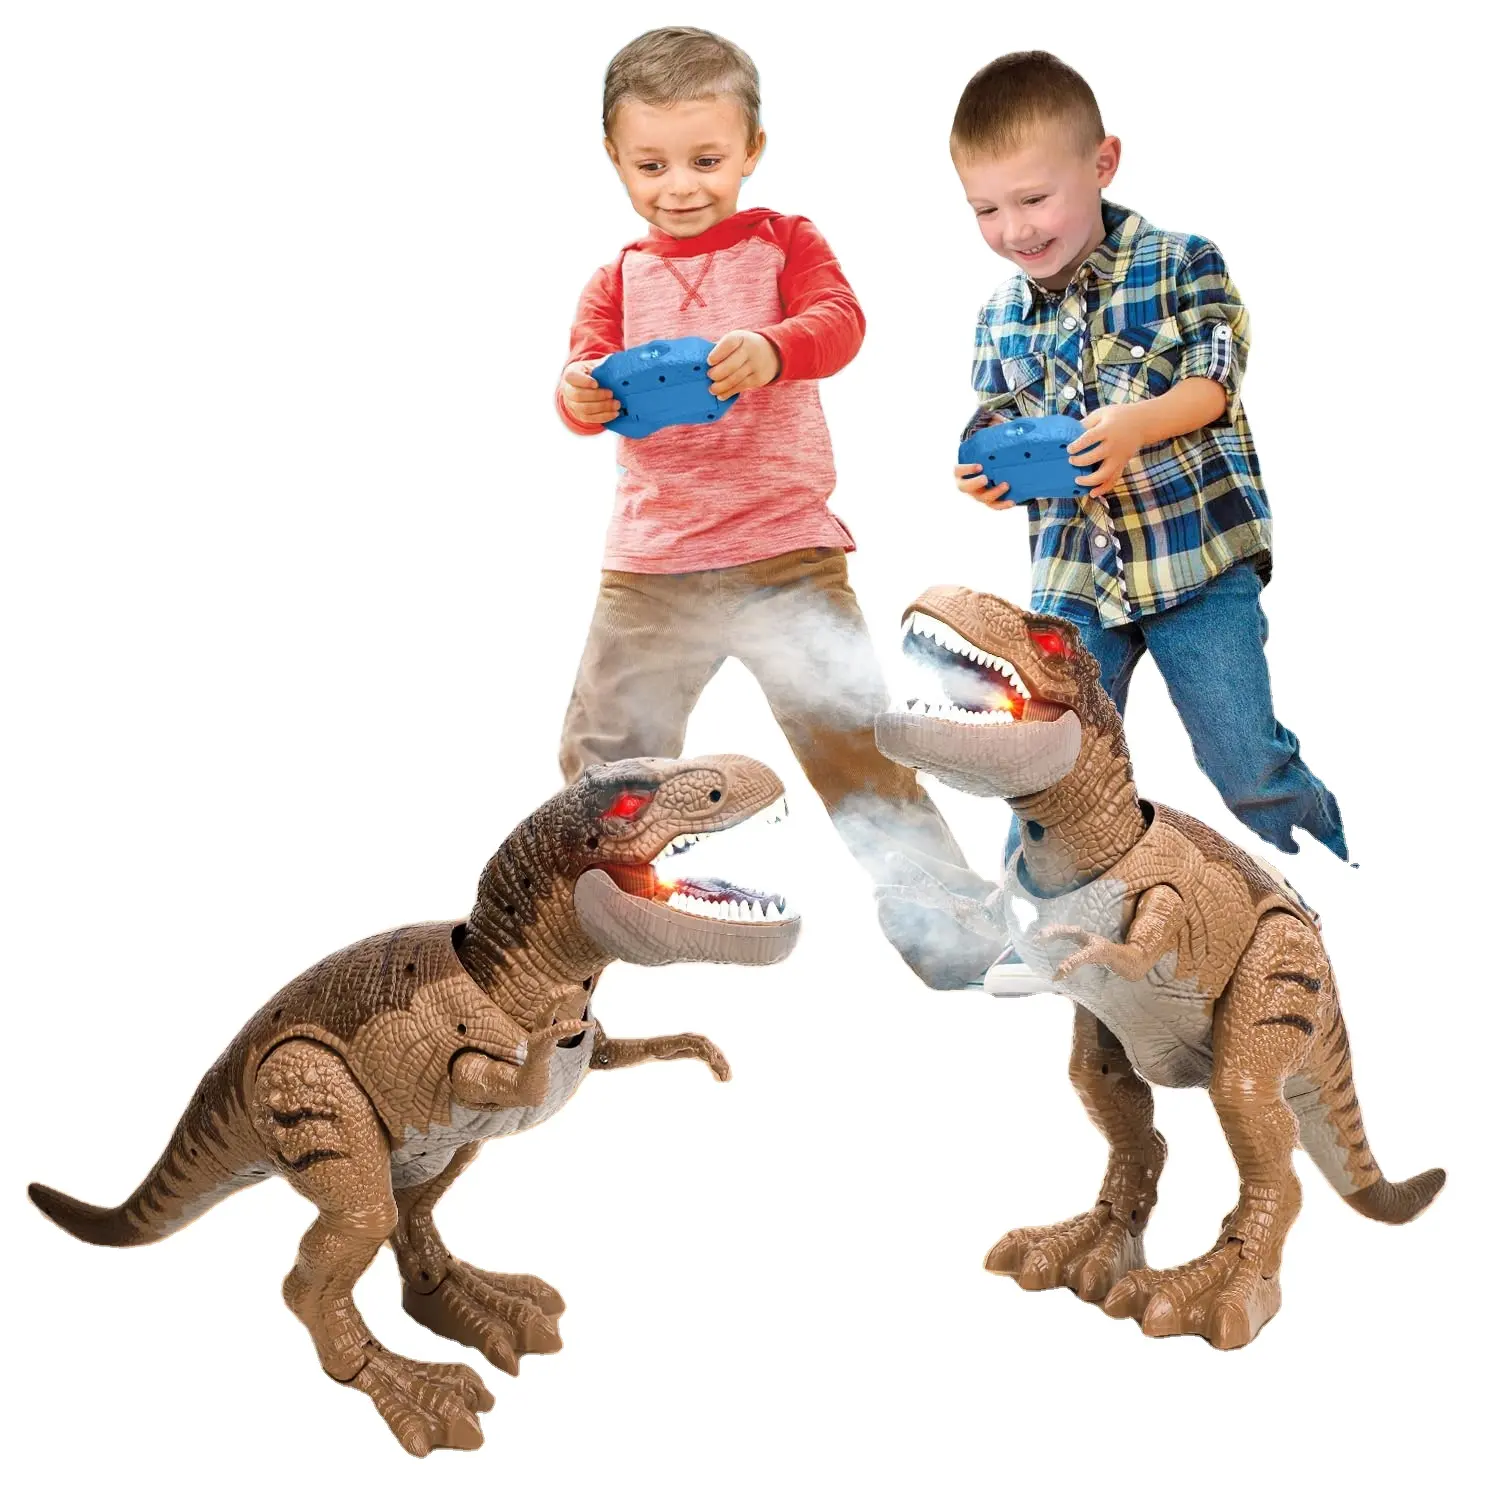 Children Simulated Red Light Eyes RC Remote Control Robot Toys Dinosaur with Sounds